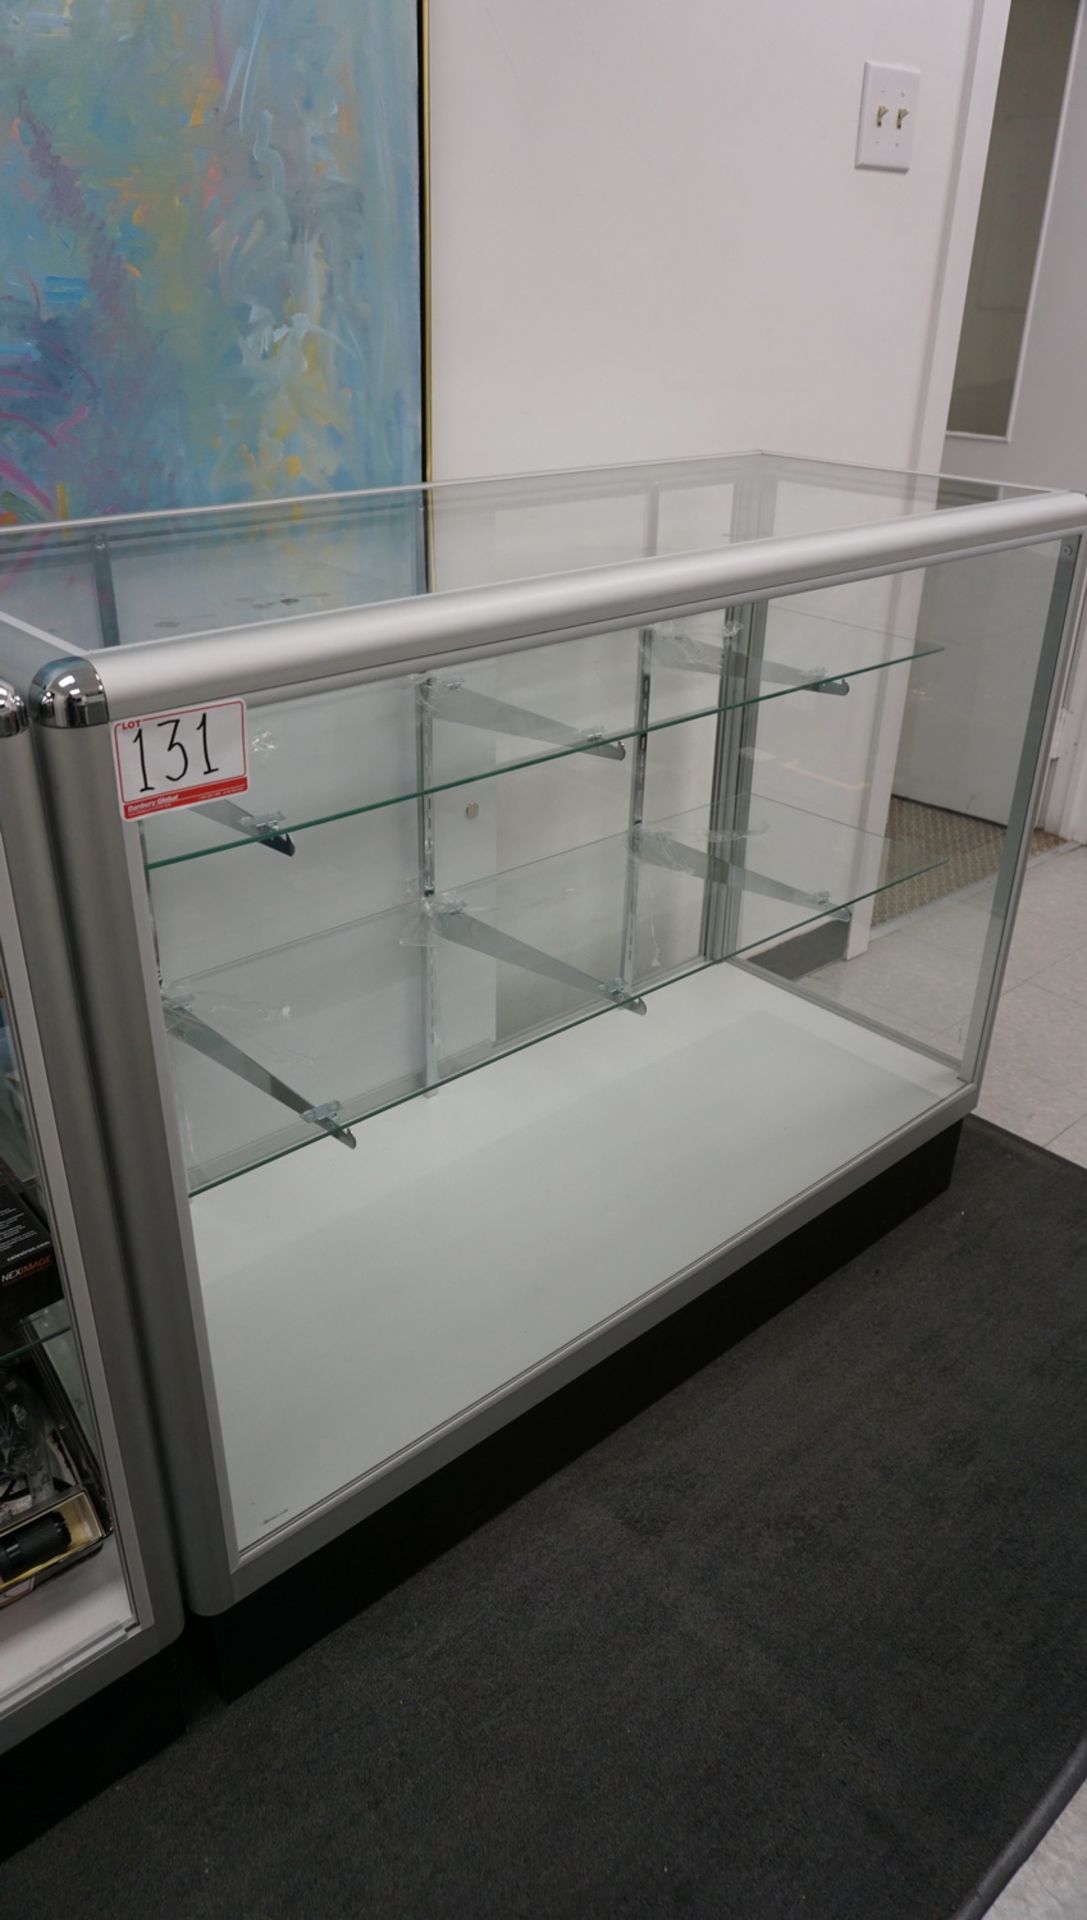 ALUMINUM FRAME & GLASS RETAIL DISPLAY SHOWCASE CABINET - 48"W X 20"D X 38.5"H (DELAYED PICKUP -